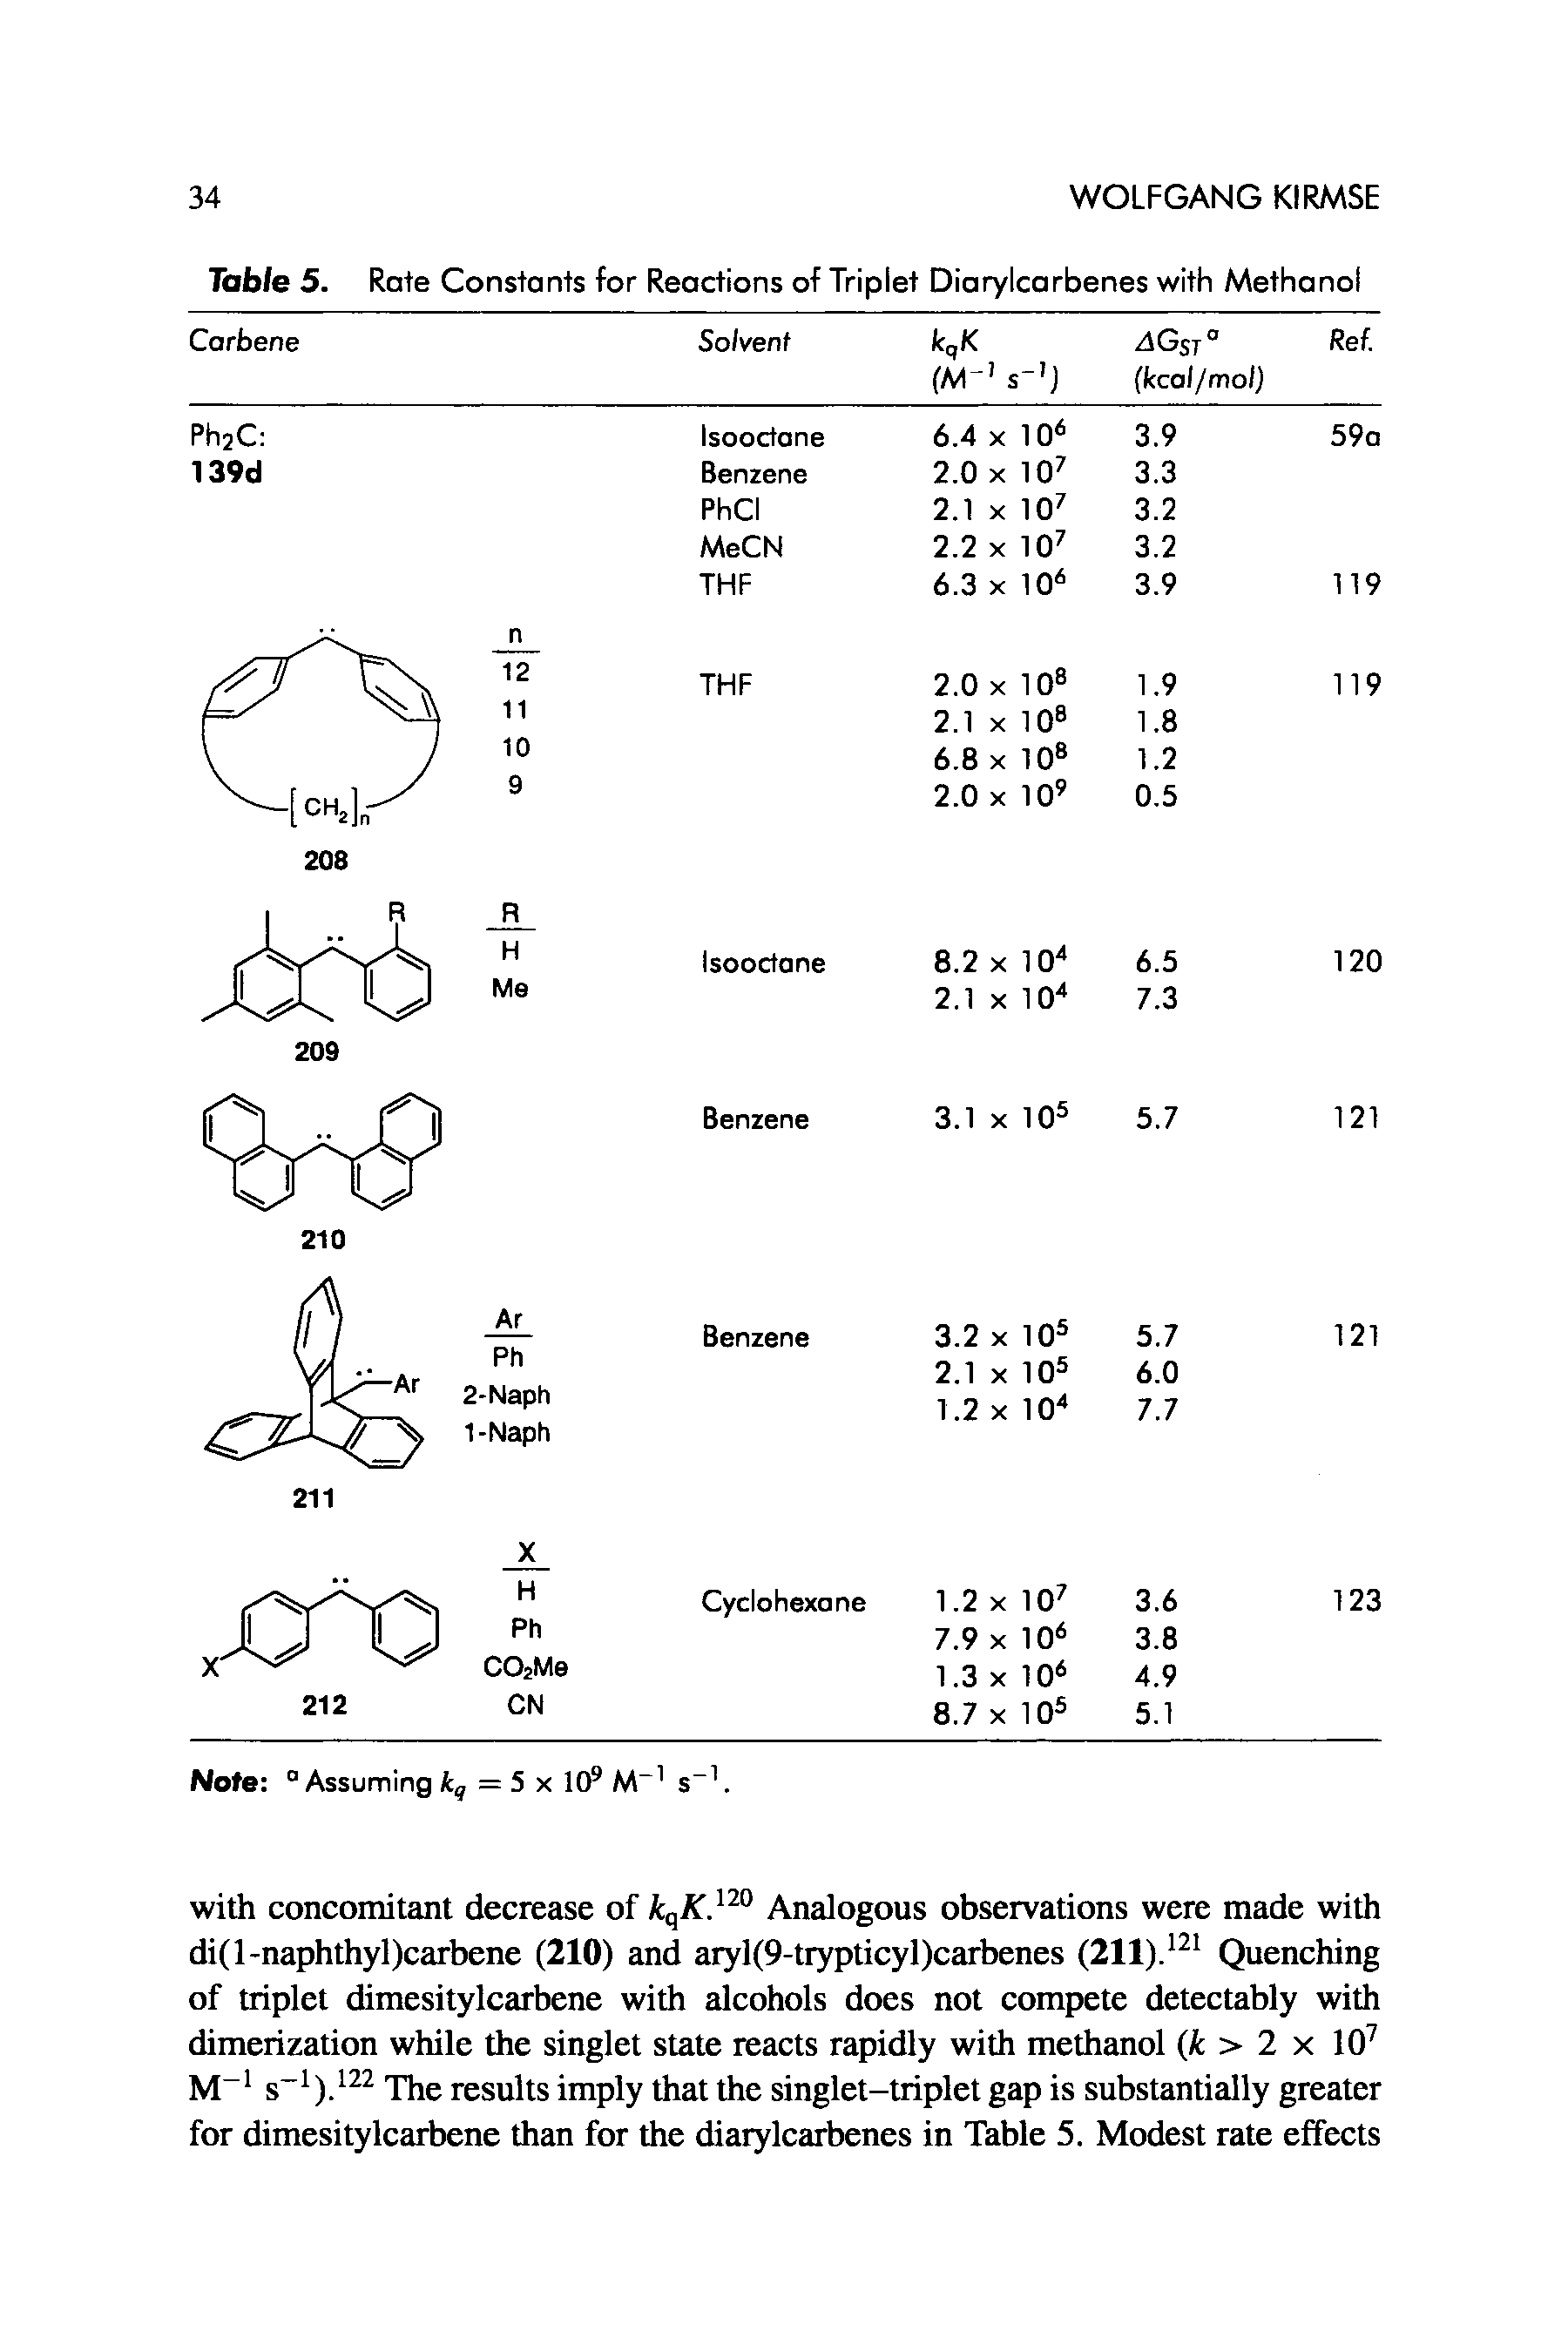 Table 5. Rate Constants for Reactions of Triplet Diarylcarbenes with Methanol...